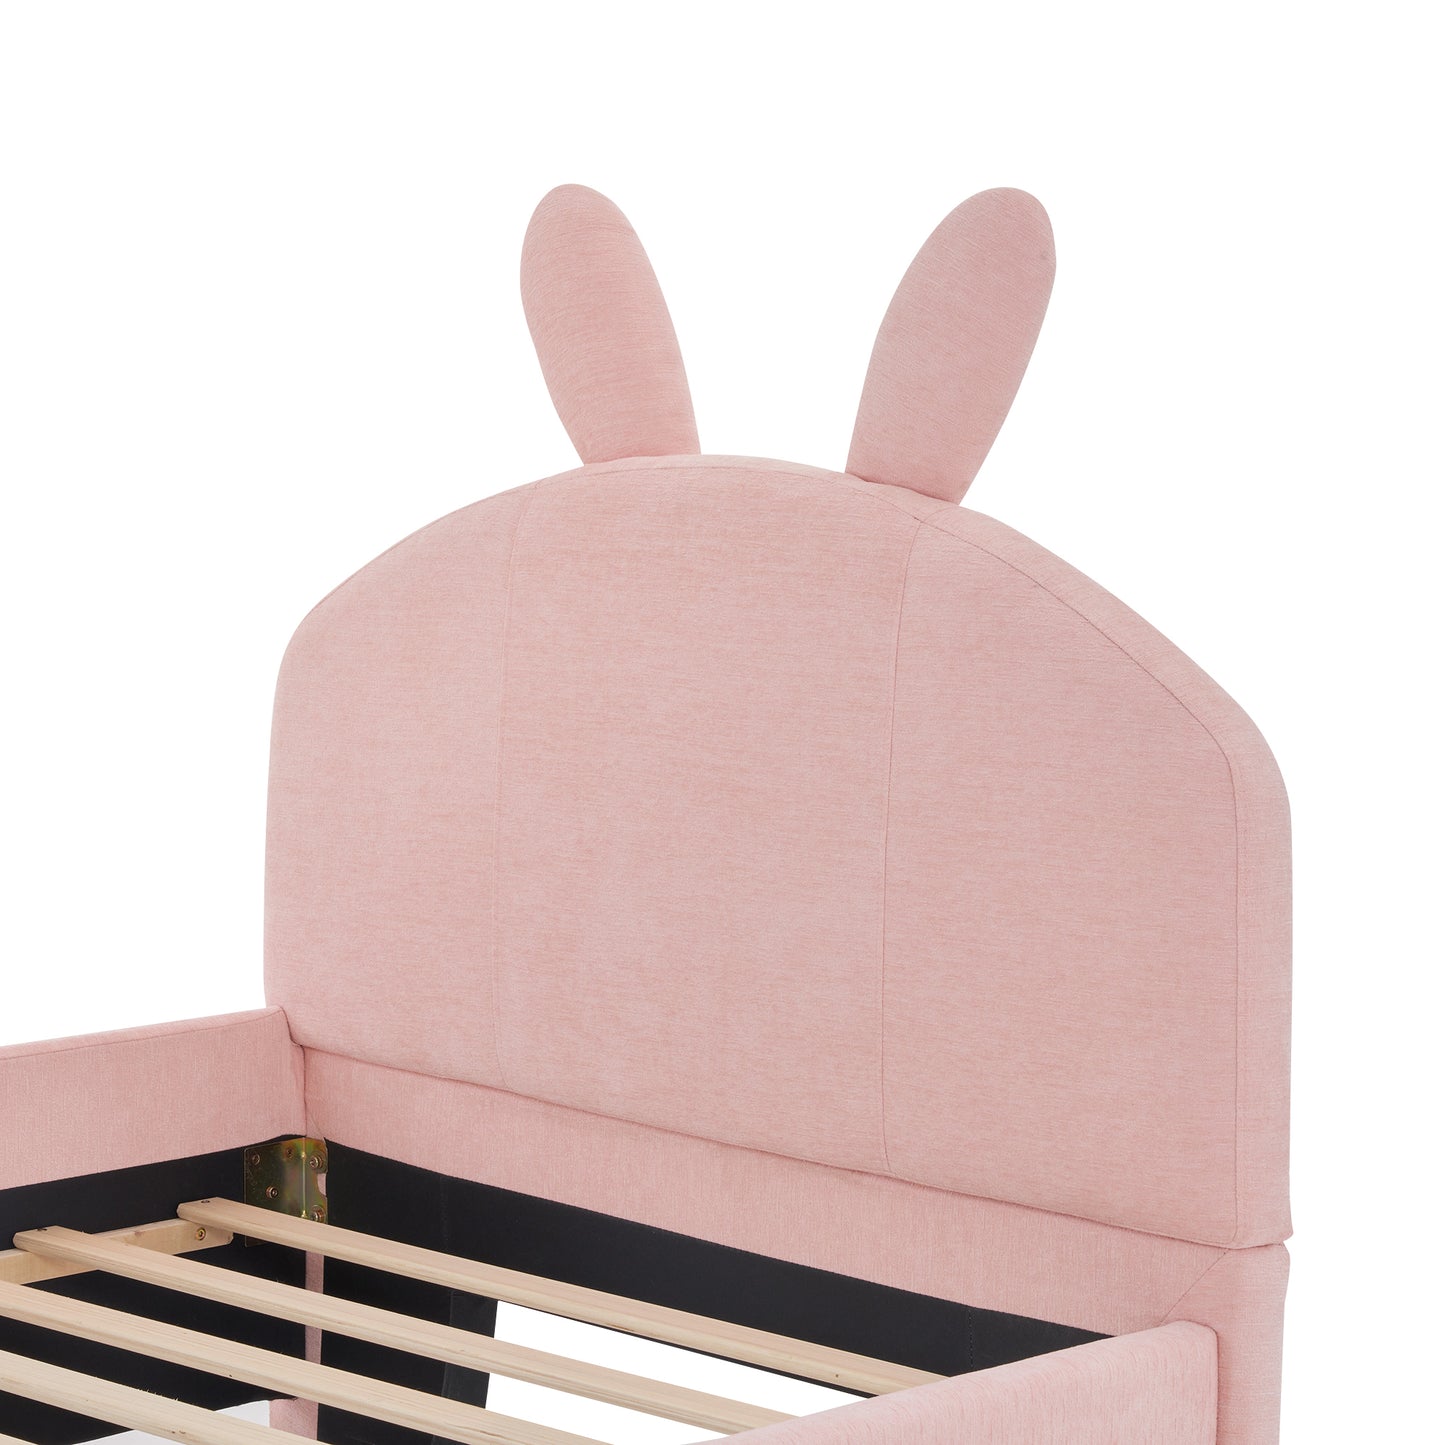 Twin Size Upholstered Platform Bed with Cartoon Ears Shaped Headboard and Trundle, Pink